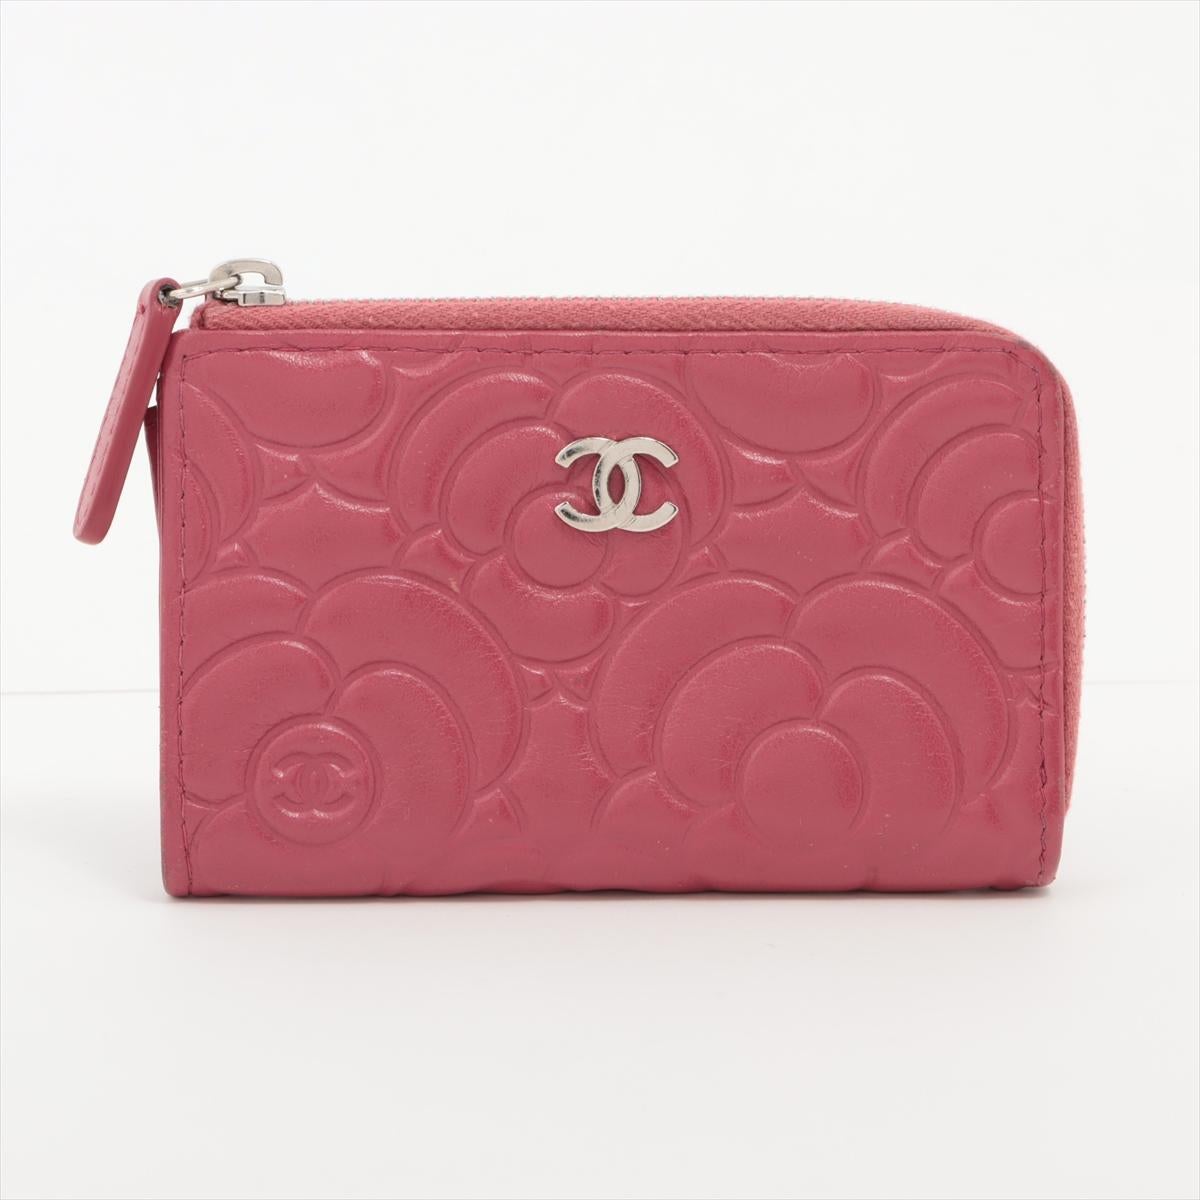 The Chanel Camelia Leather Coin Case in Fuchsia is an elegant and vibrant accessory that captures the essence of Chanel's timeless style. Crafted from luxurious leather, the coin case features a distinctive camellia flower design, a motif synonymous